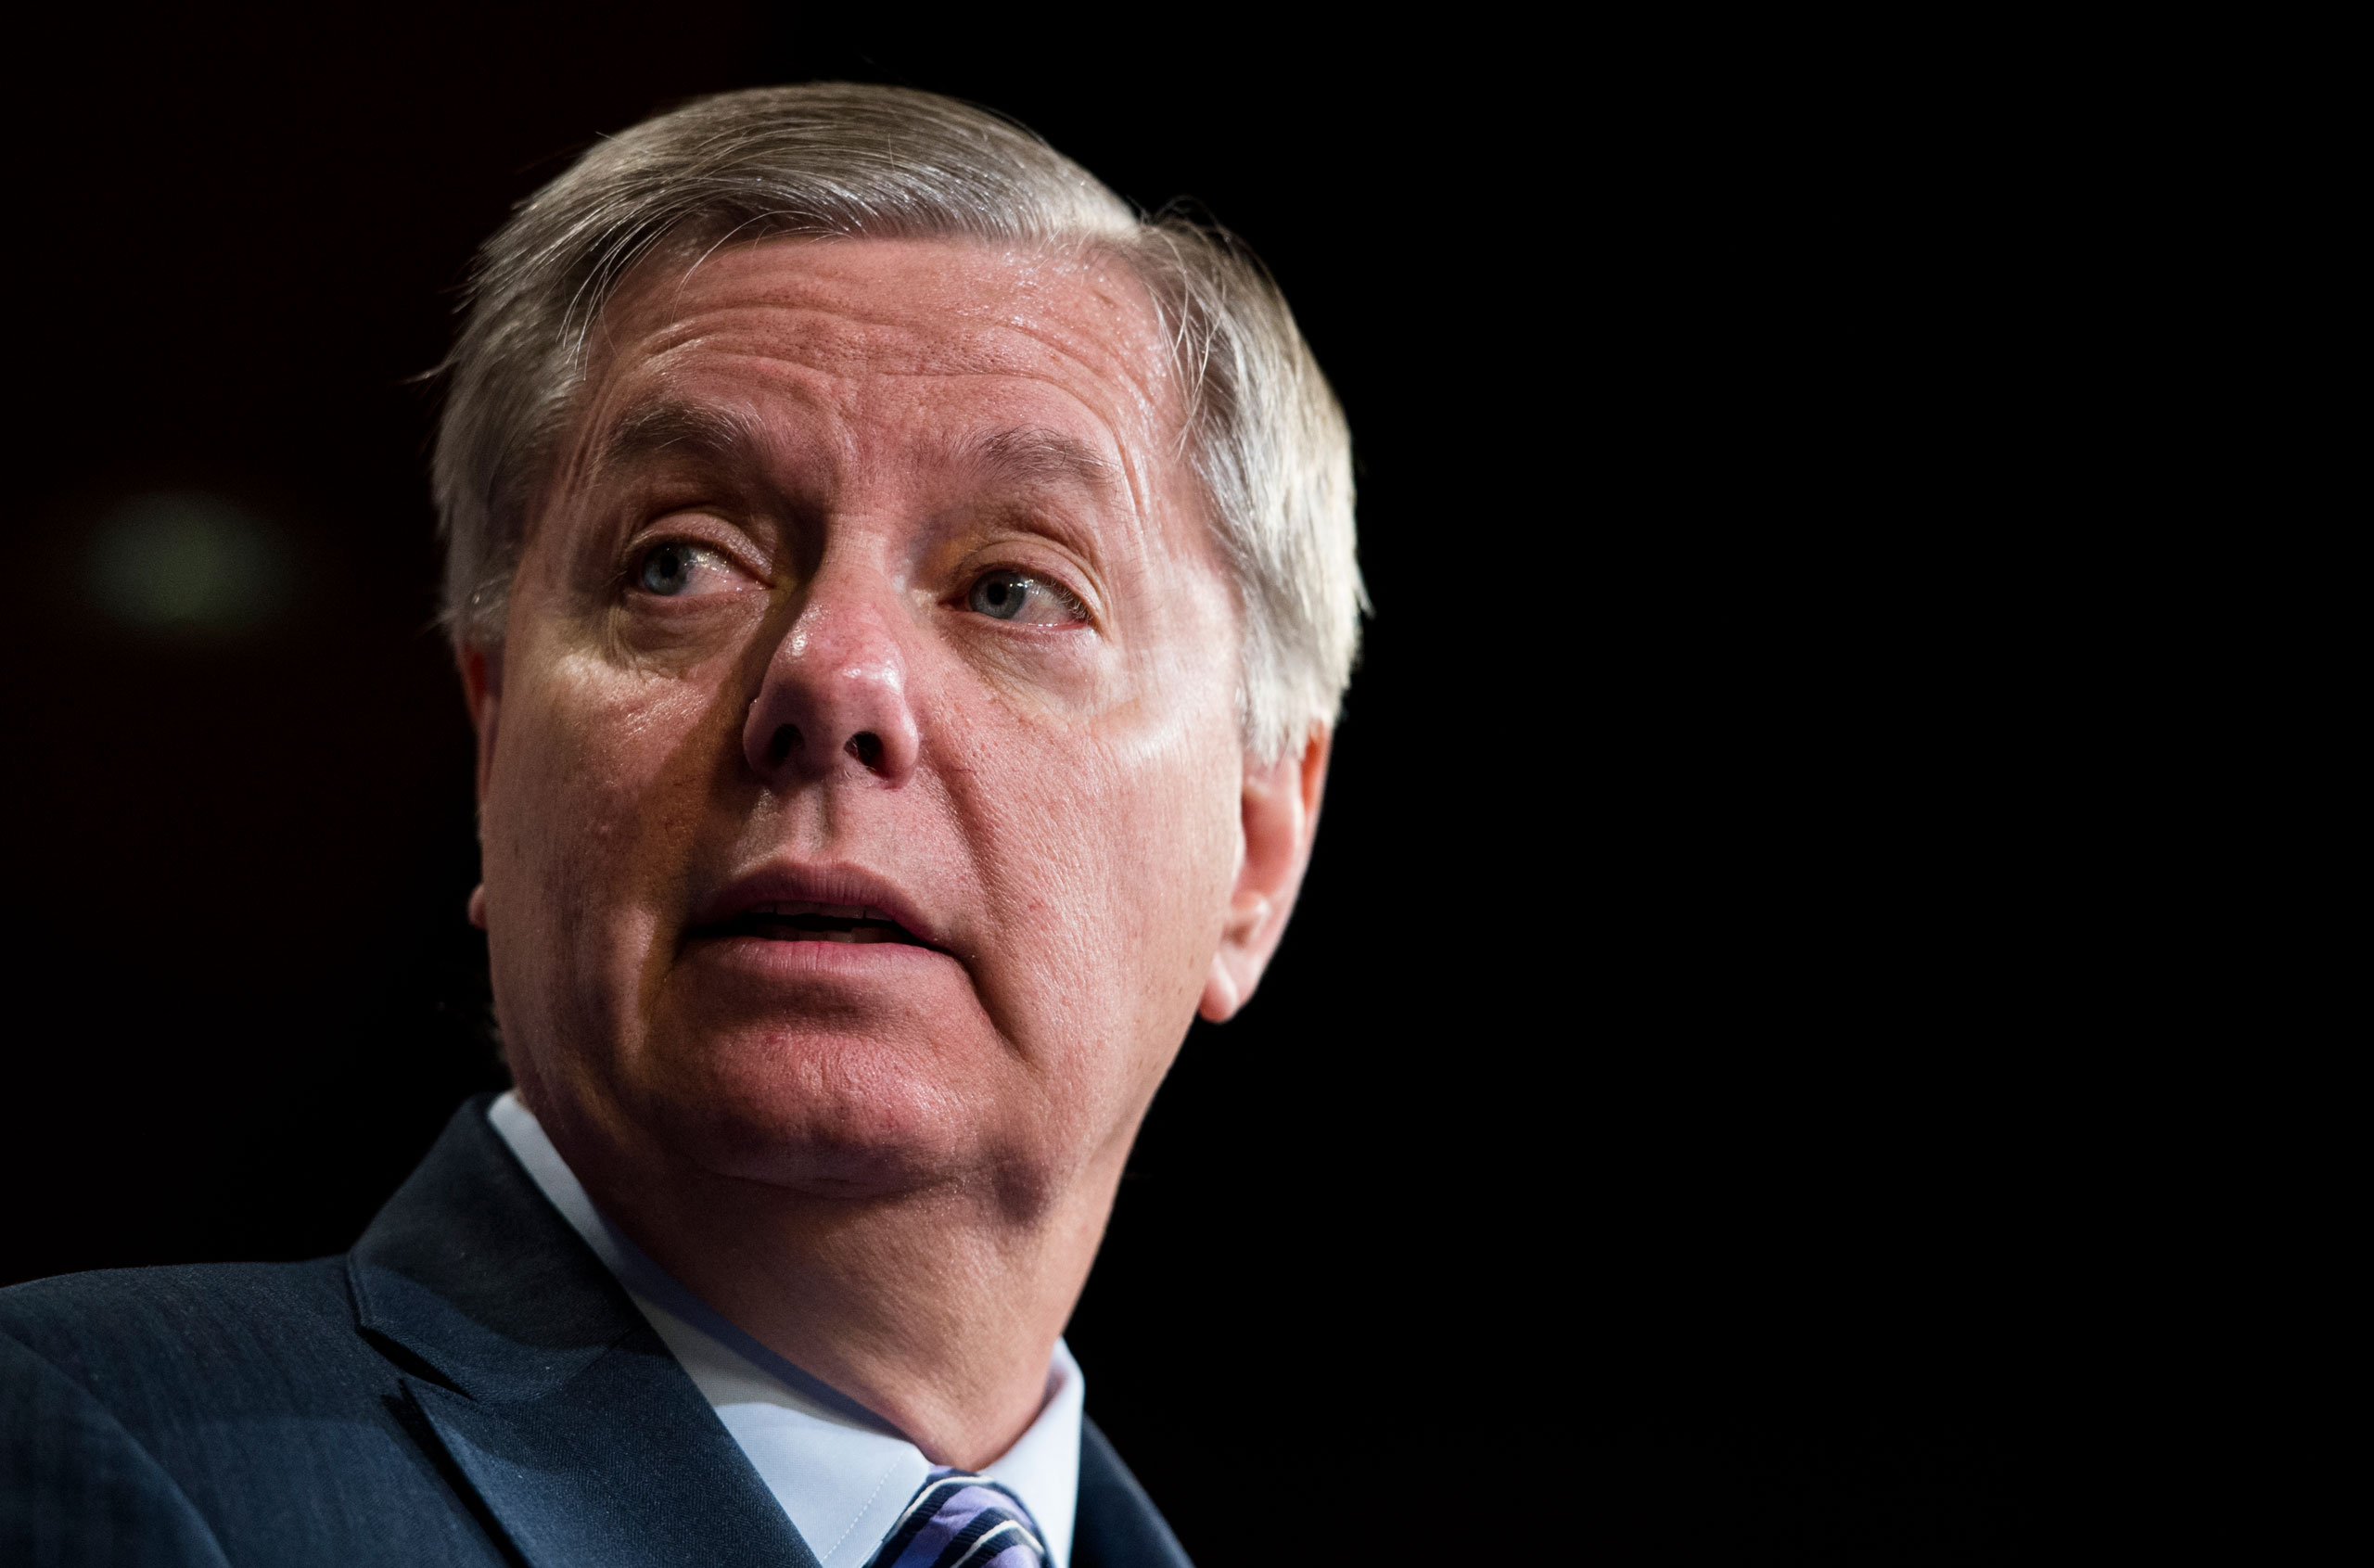 Sen. Lindsey Graham speaks during a news conference in Washington D.C., March 26, 2014 . (Bill Clark—CQ Roll Call/Getty Images)